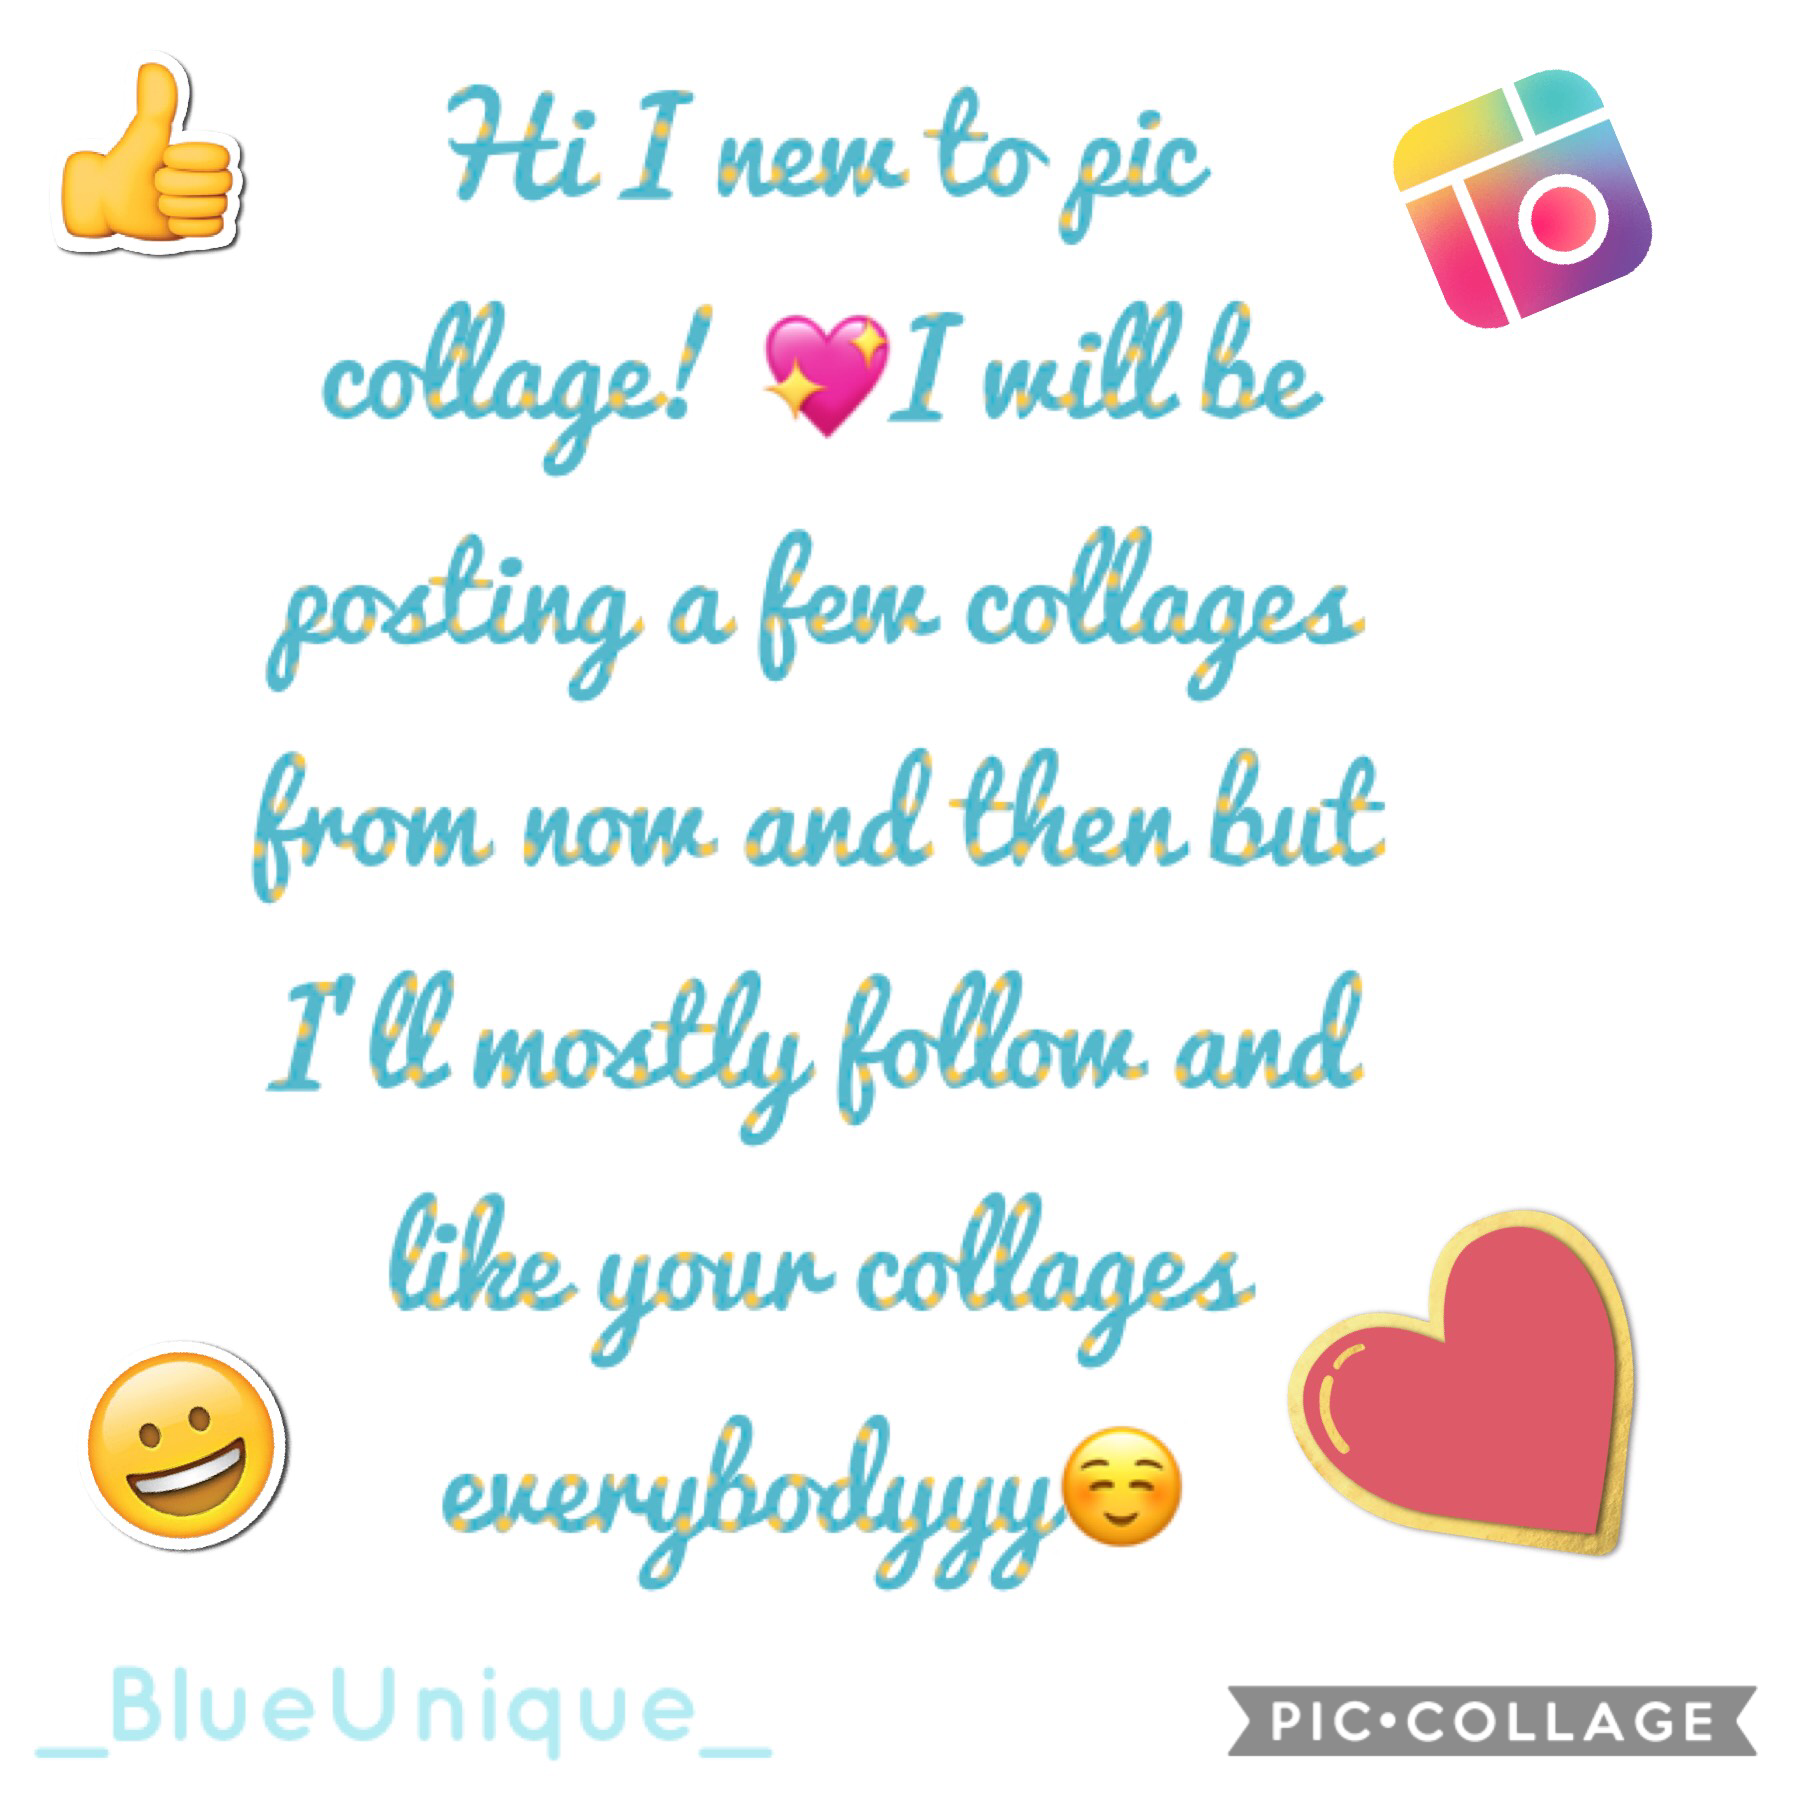 Comment if you want a follow💖